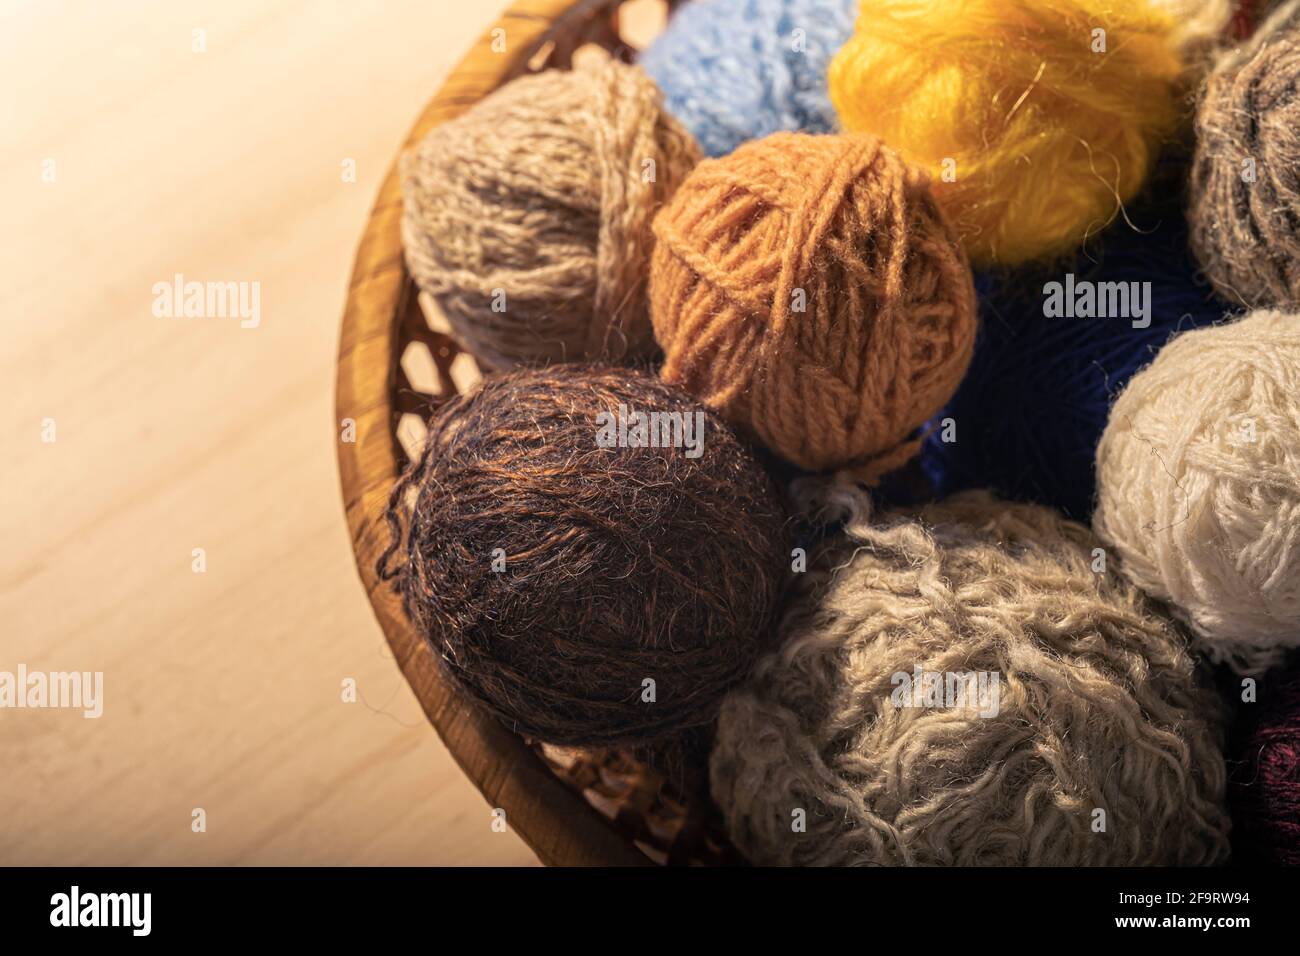 Knitting supplies close-up. Balls of knitting wool in a round